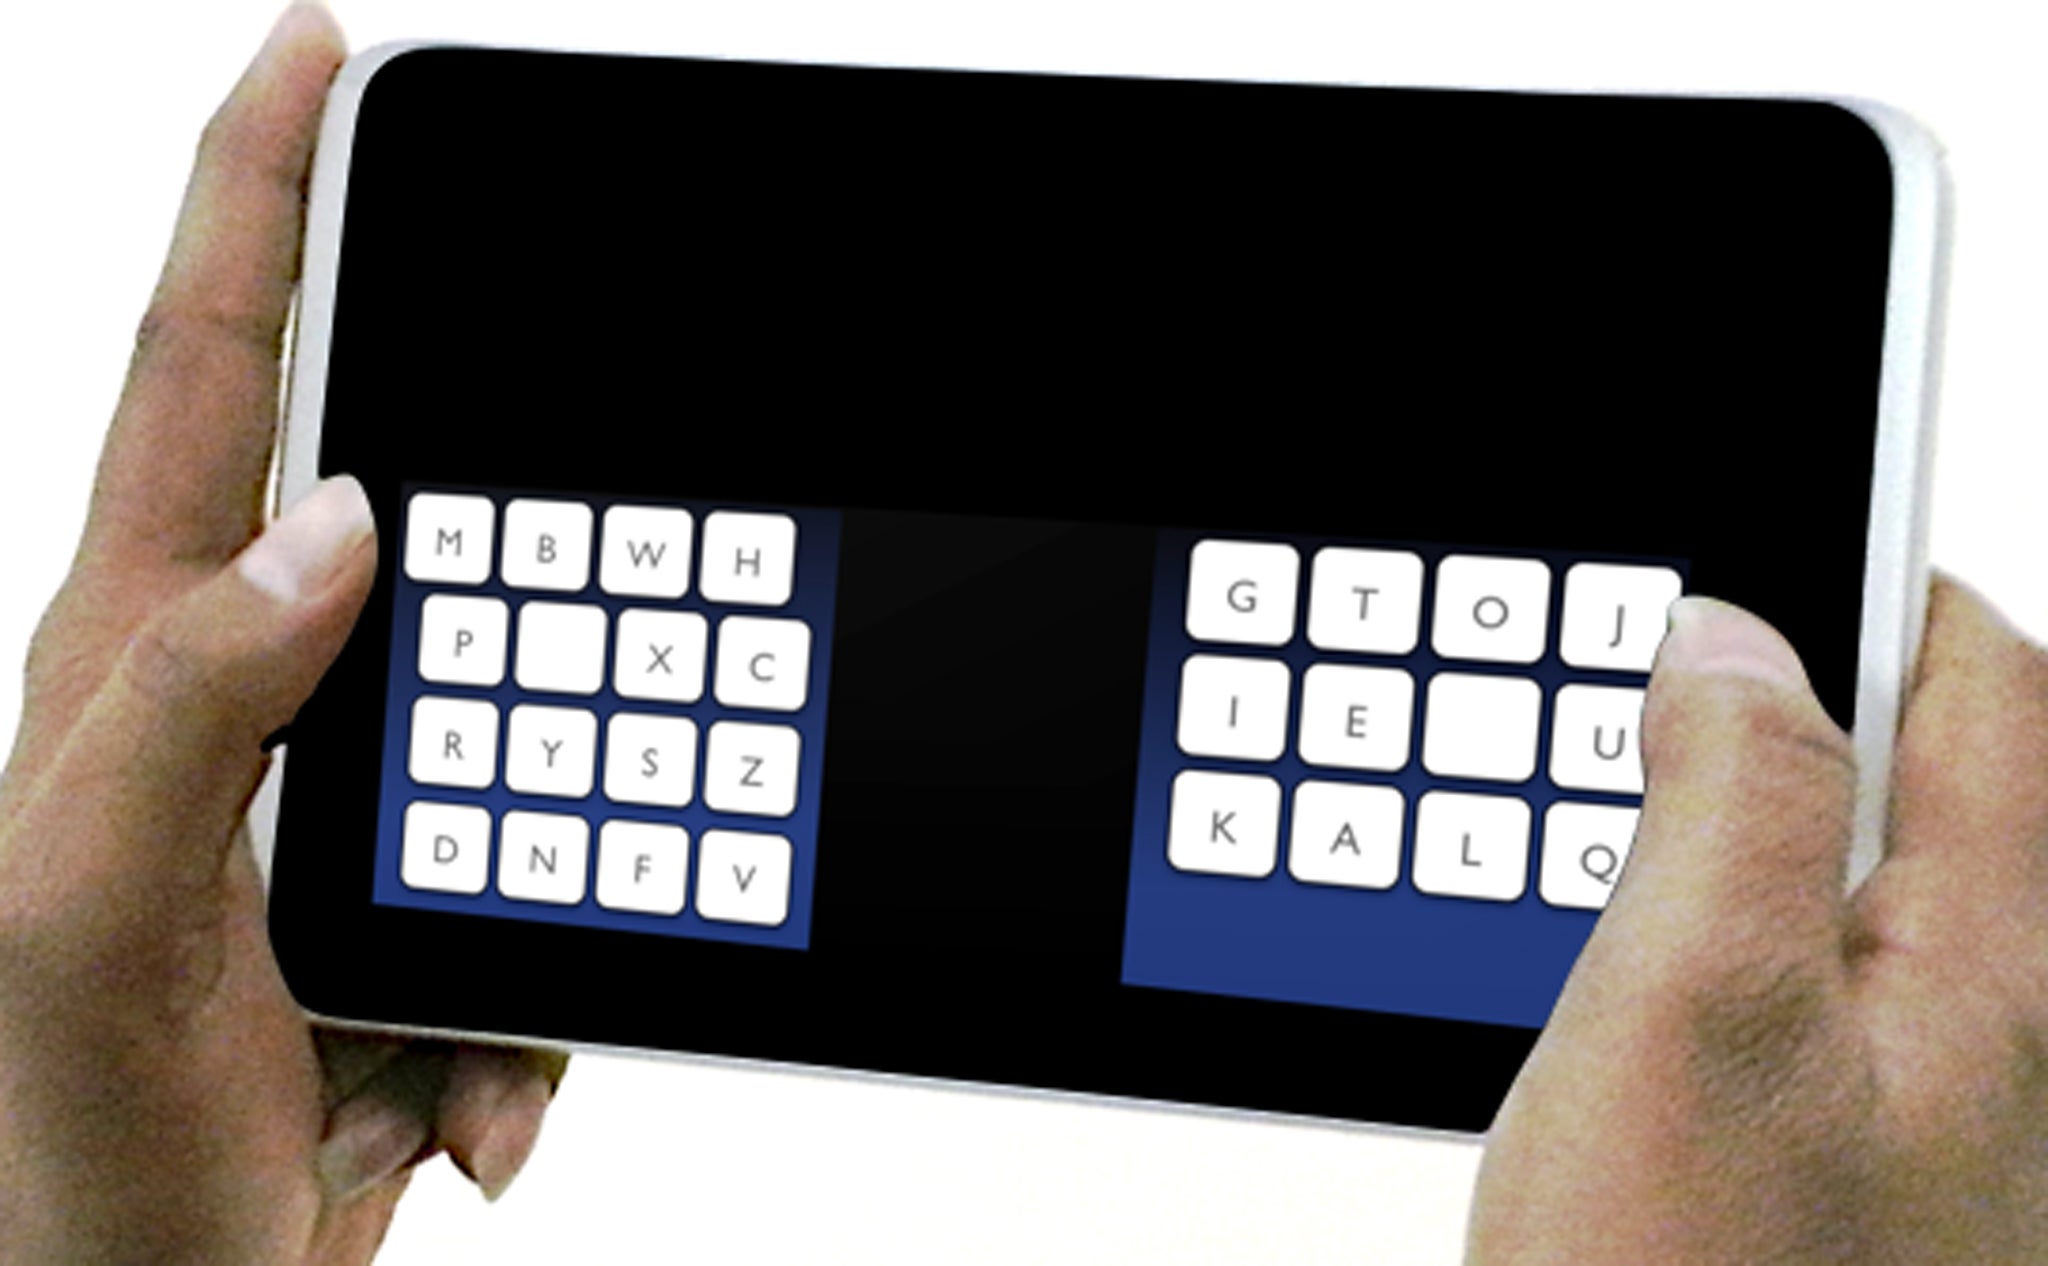 The Kalq keyboard rearranges letters and lets users type with their thumbs